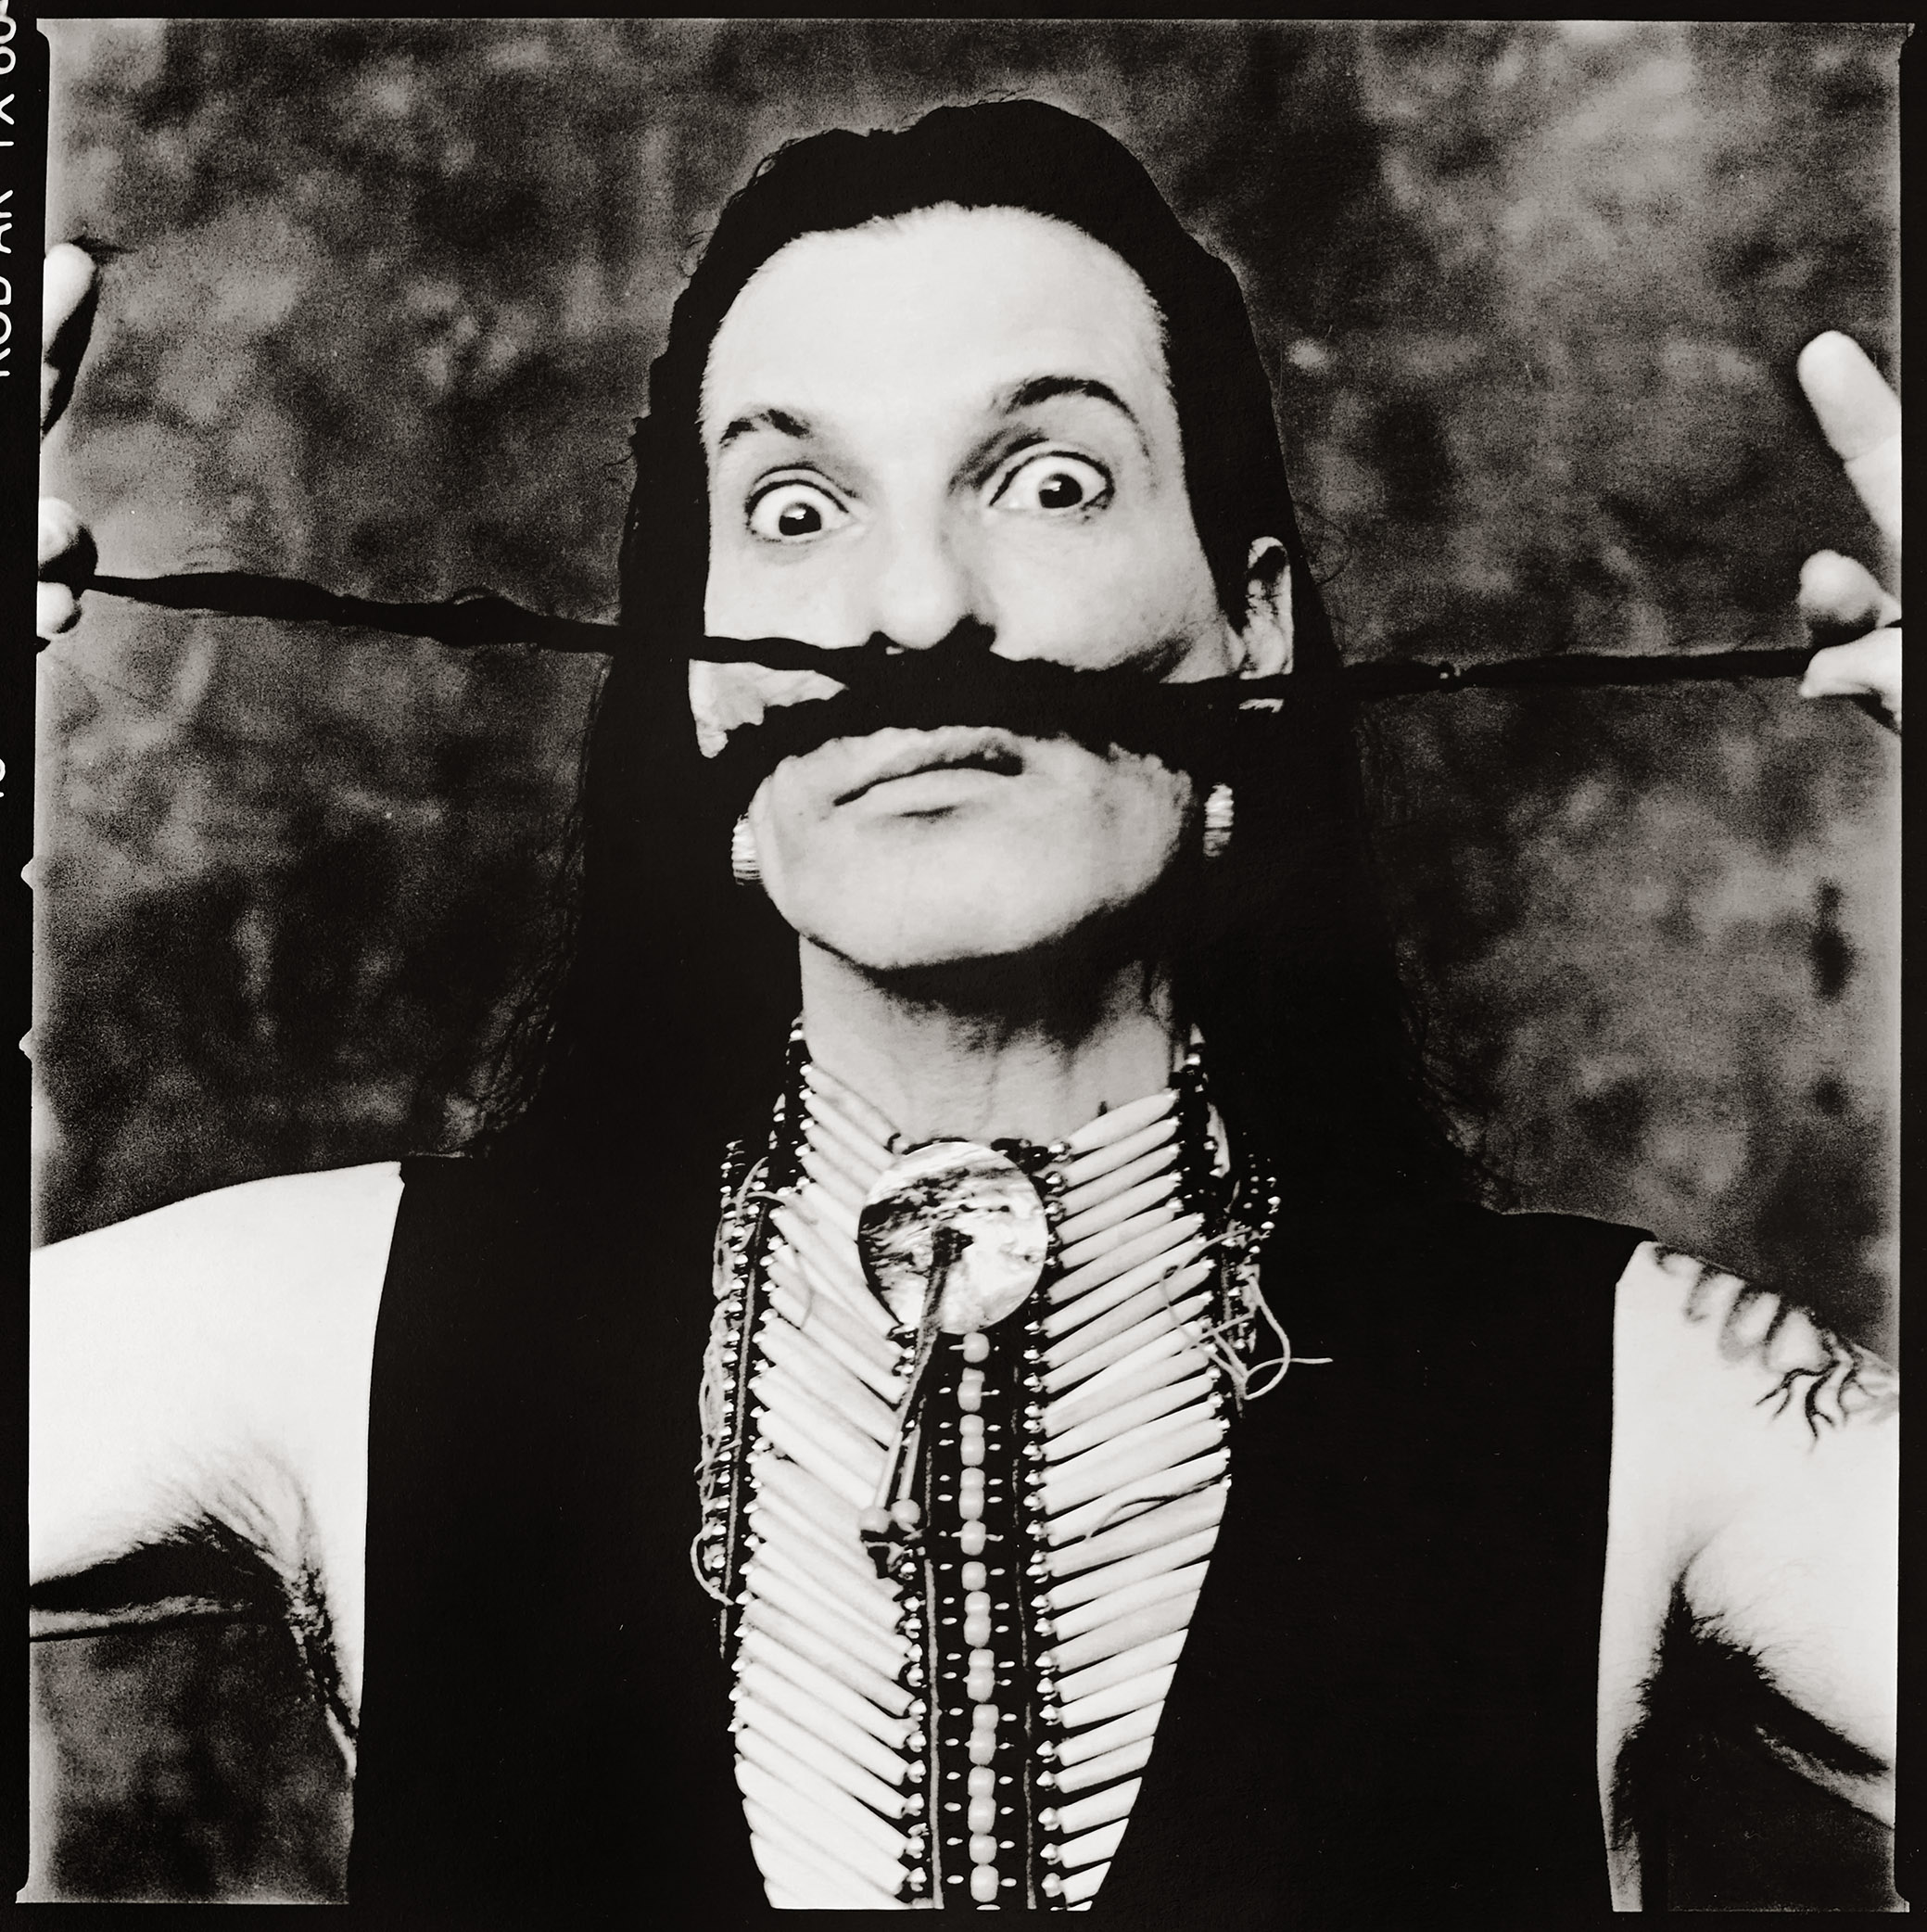 WILLY DEVILLE AS DALI